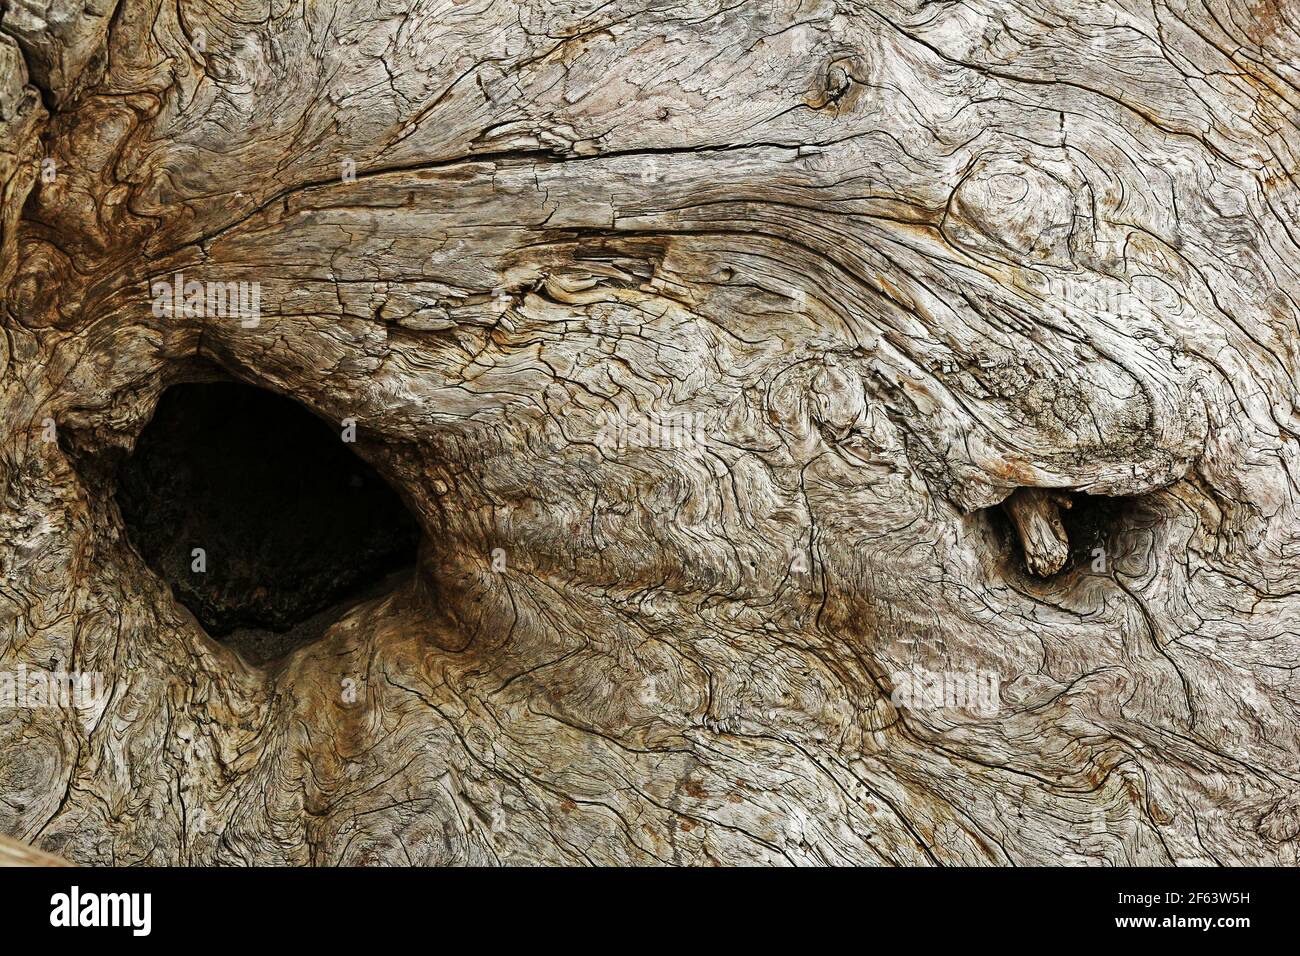 Close-up detail of the exposed wood of a tree. Stock Photo